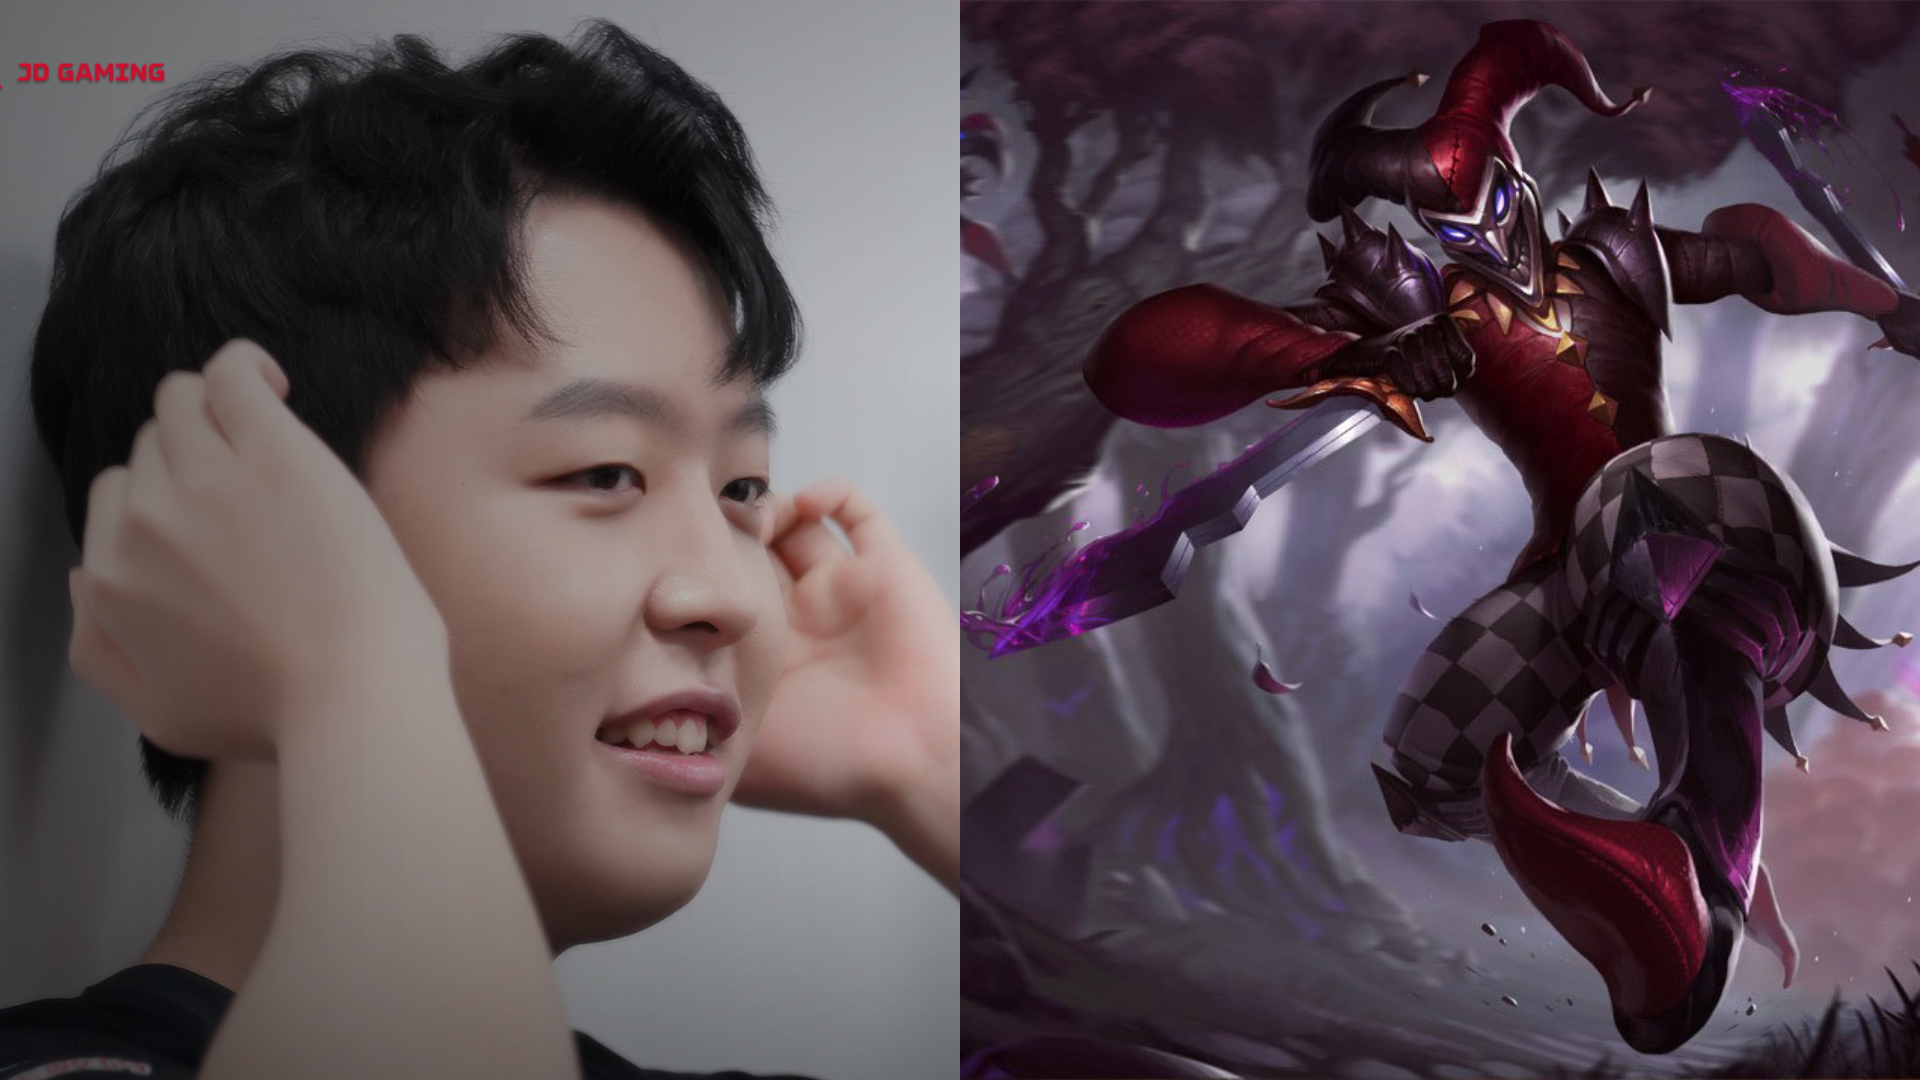 After 7 years, JD Gaming's Kanavi brings Shaco back to the | ONE